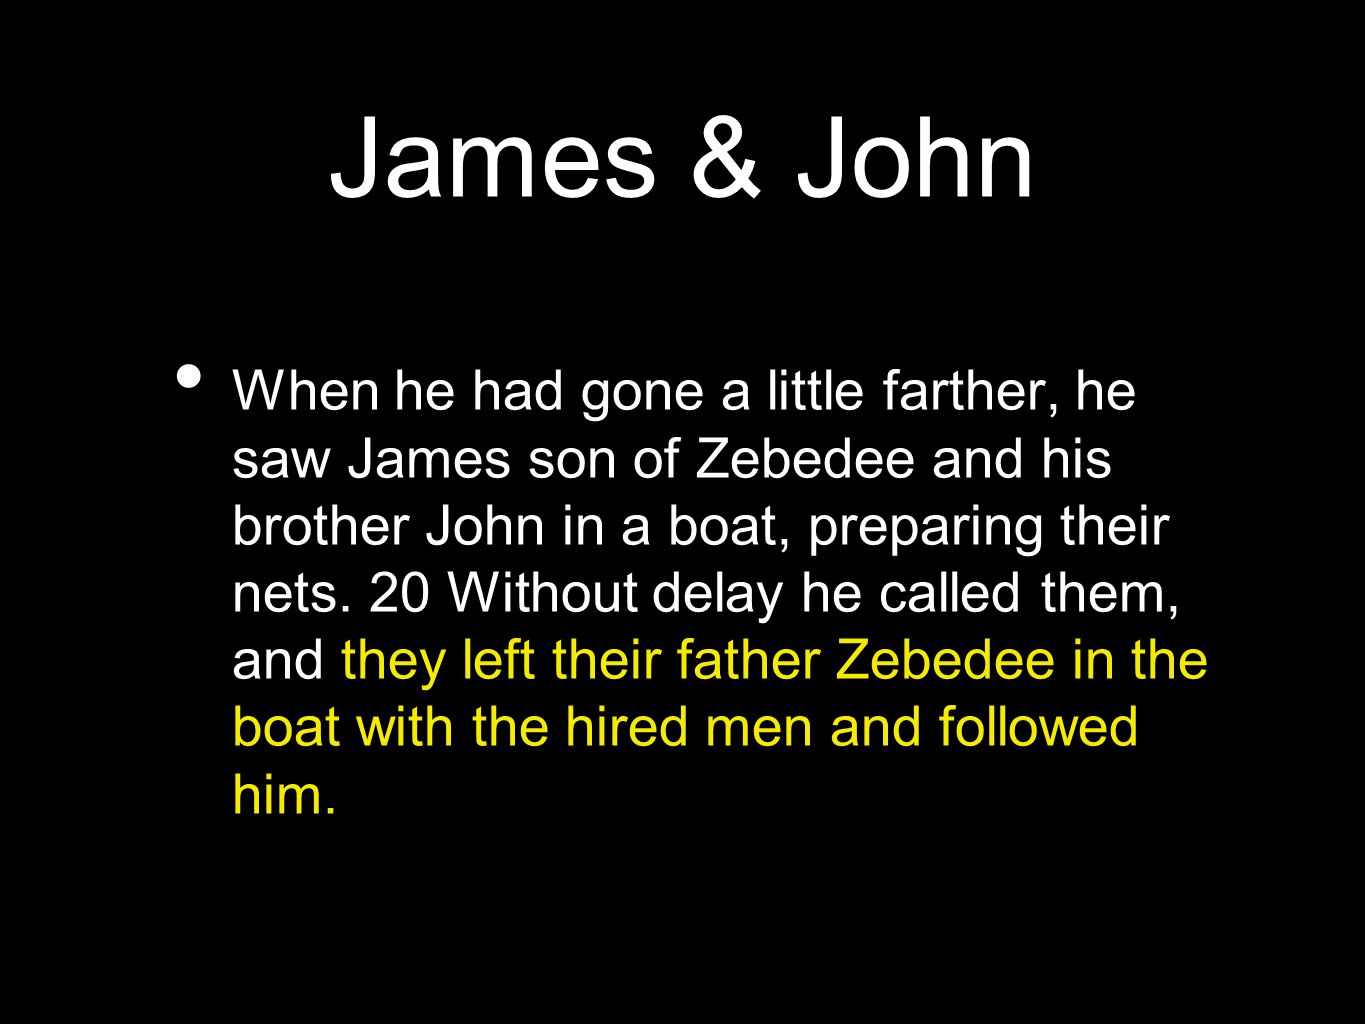 James & John When he had gone a little farther, he saw James son of Zebedee and his brother John in a boat, preparing their nets.